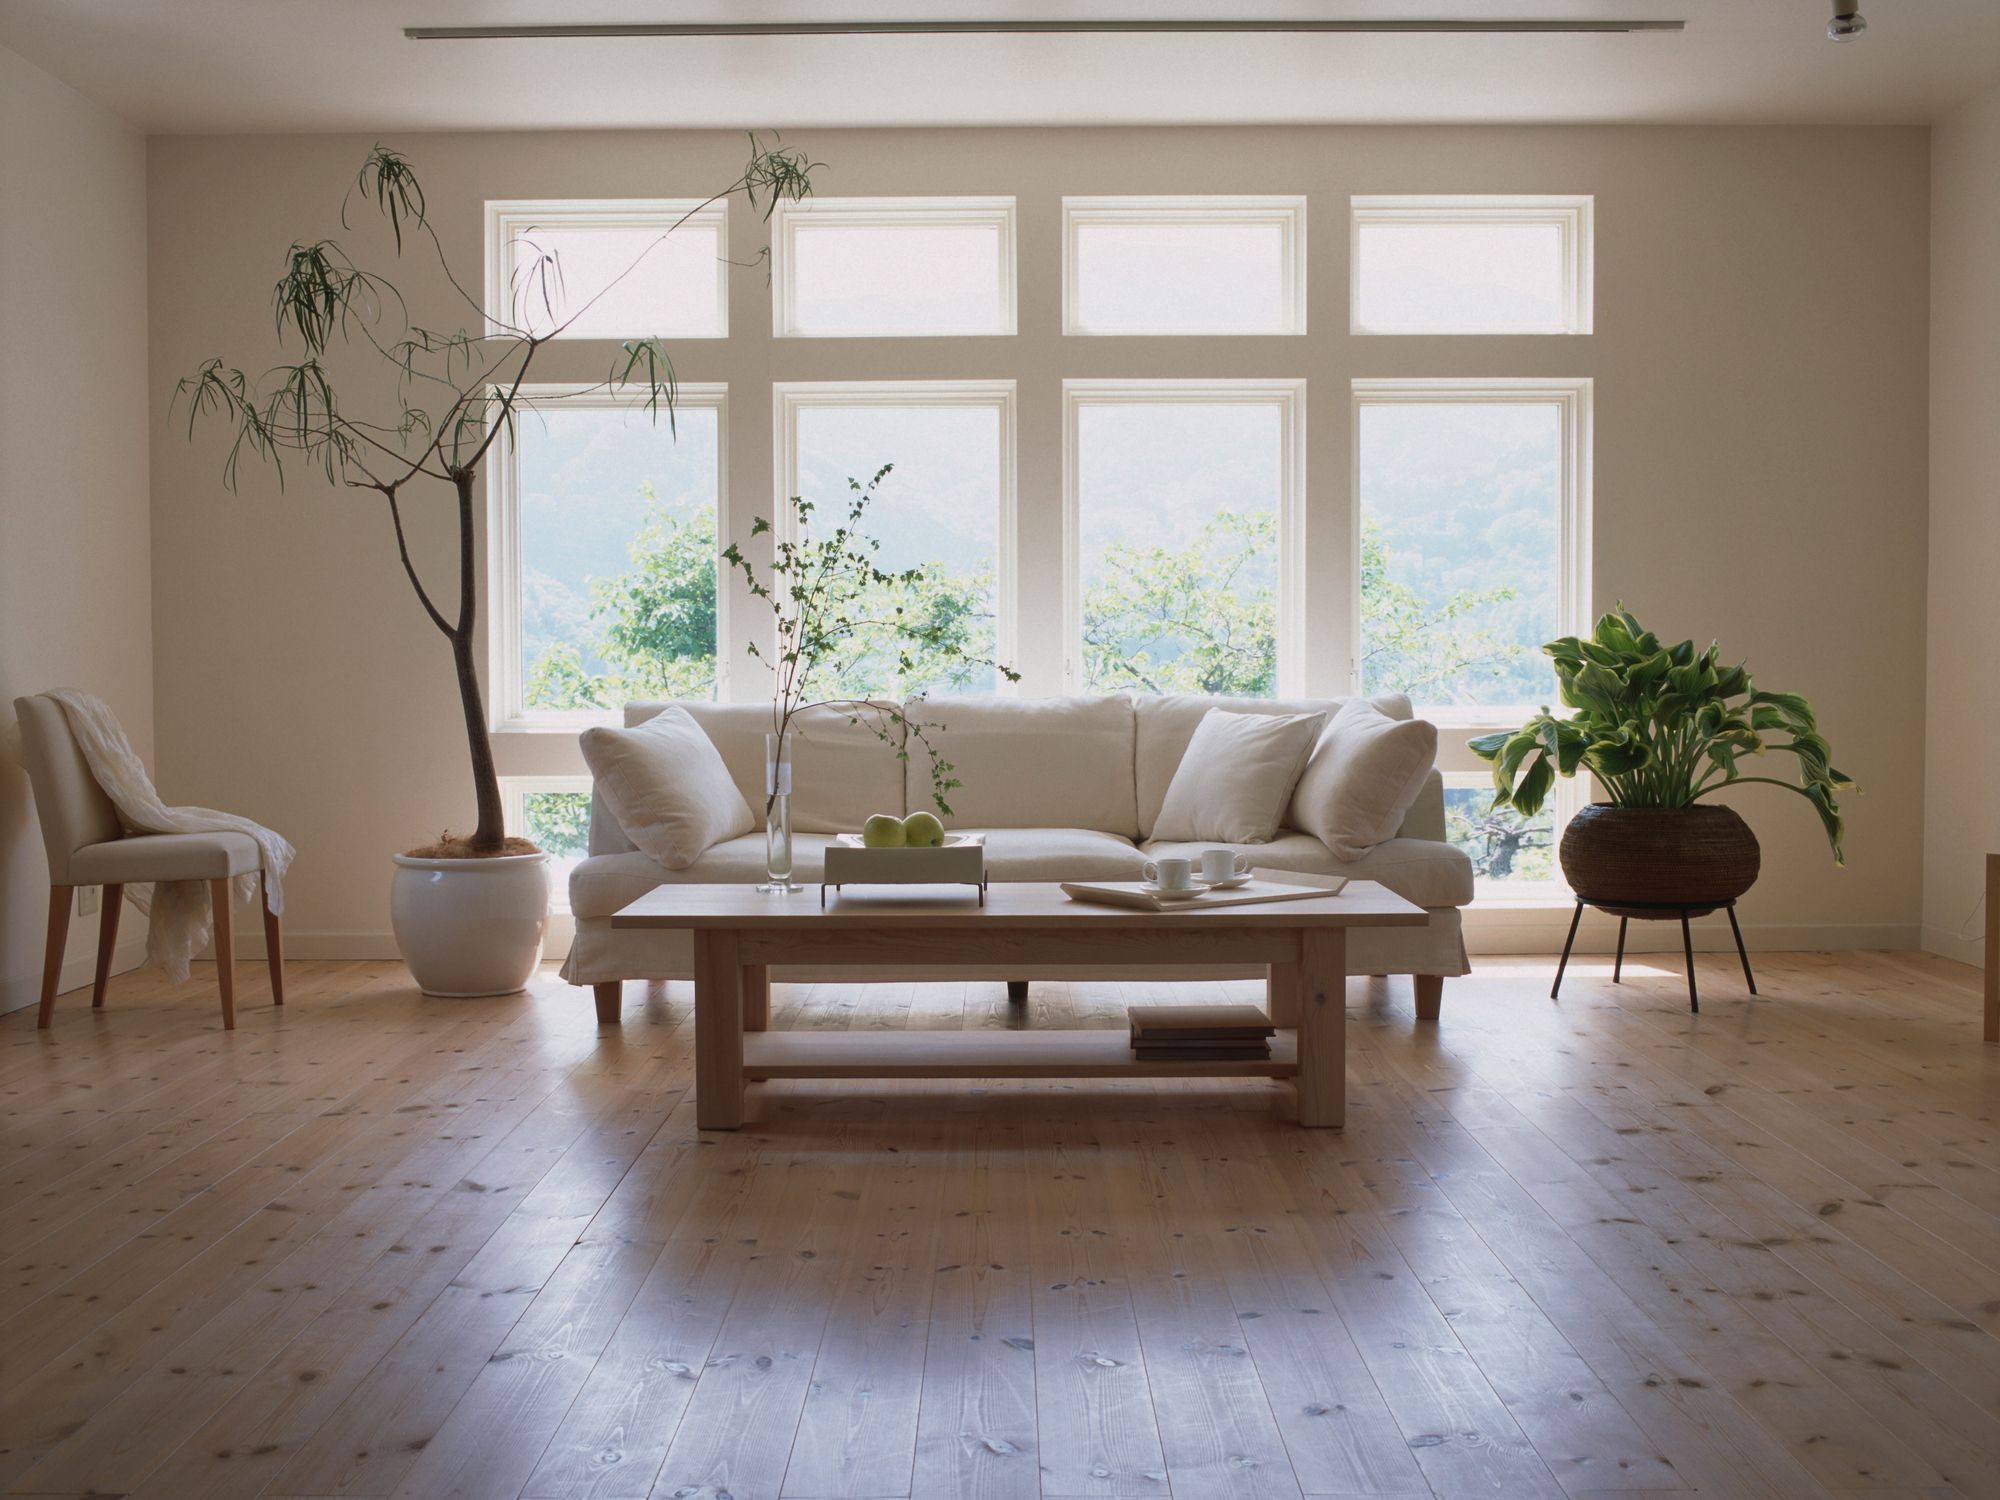 26 Fashionable Hardwood Flooring Stores Reno Nv 2024 free download hardwood flooring stores reno nv of laminate flooring pros and cons in living room laminate floor gettyimages dexph070 001 58b5cc793df78cdcd8be2938